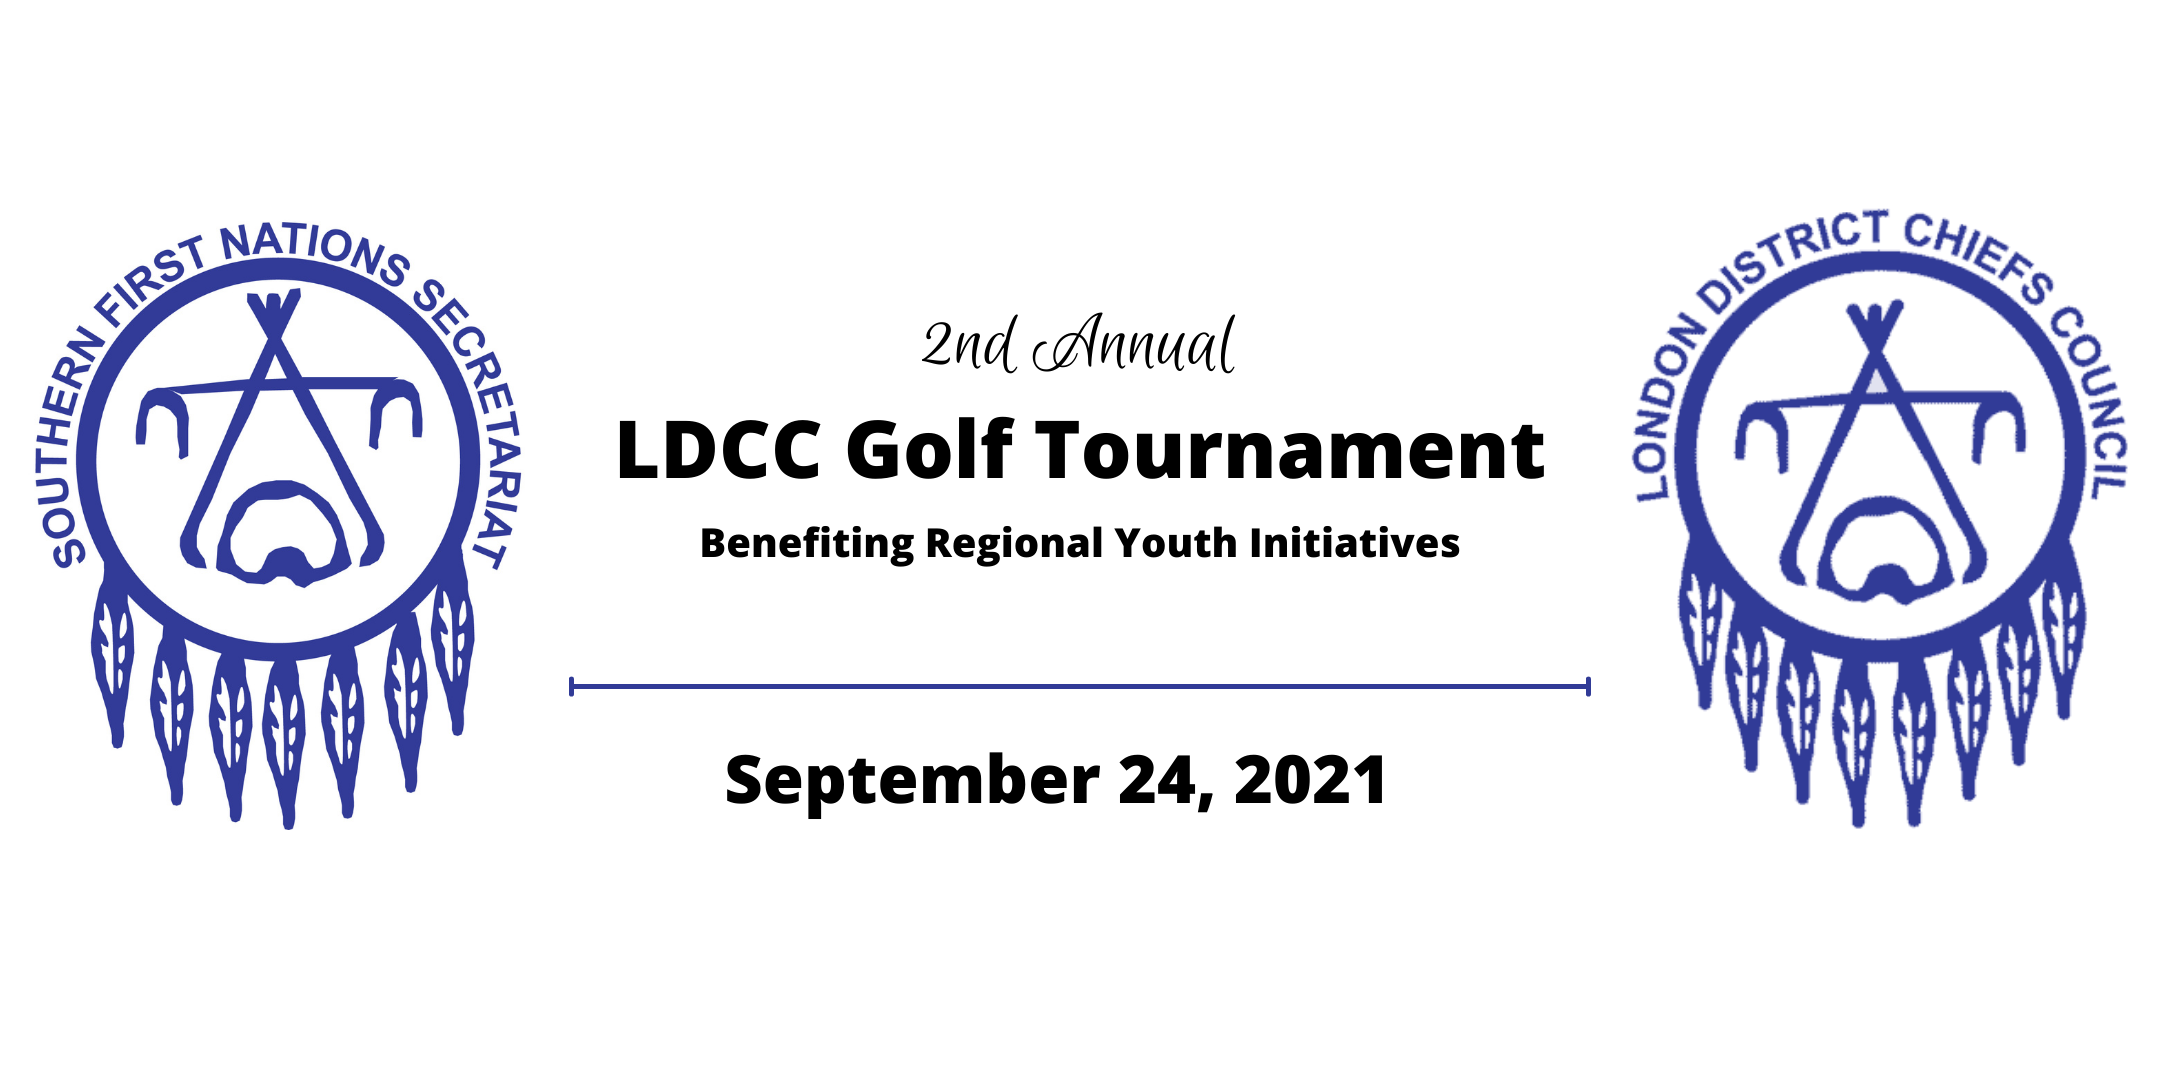 2nd Annual LDCC Golf Tournament Benefiting Regional Youth Initiatives